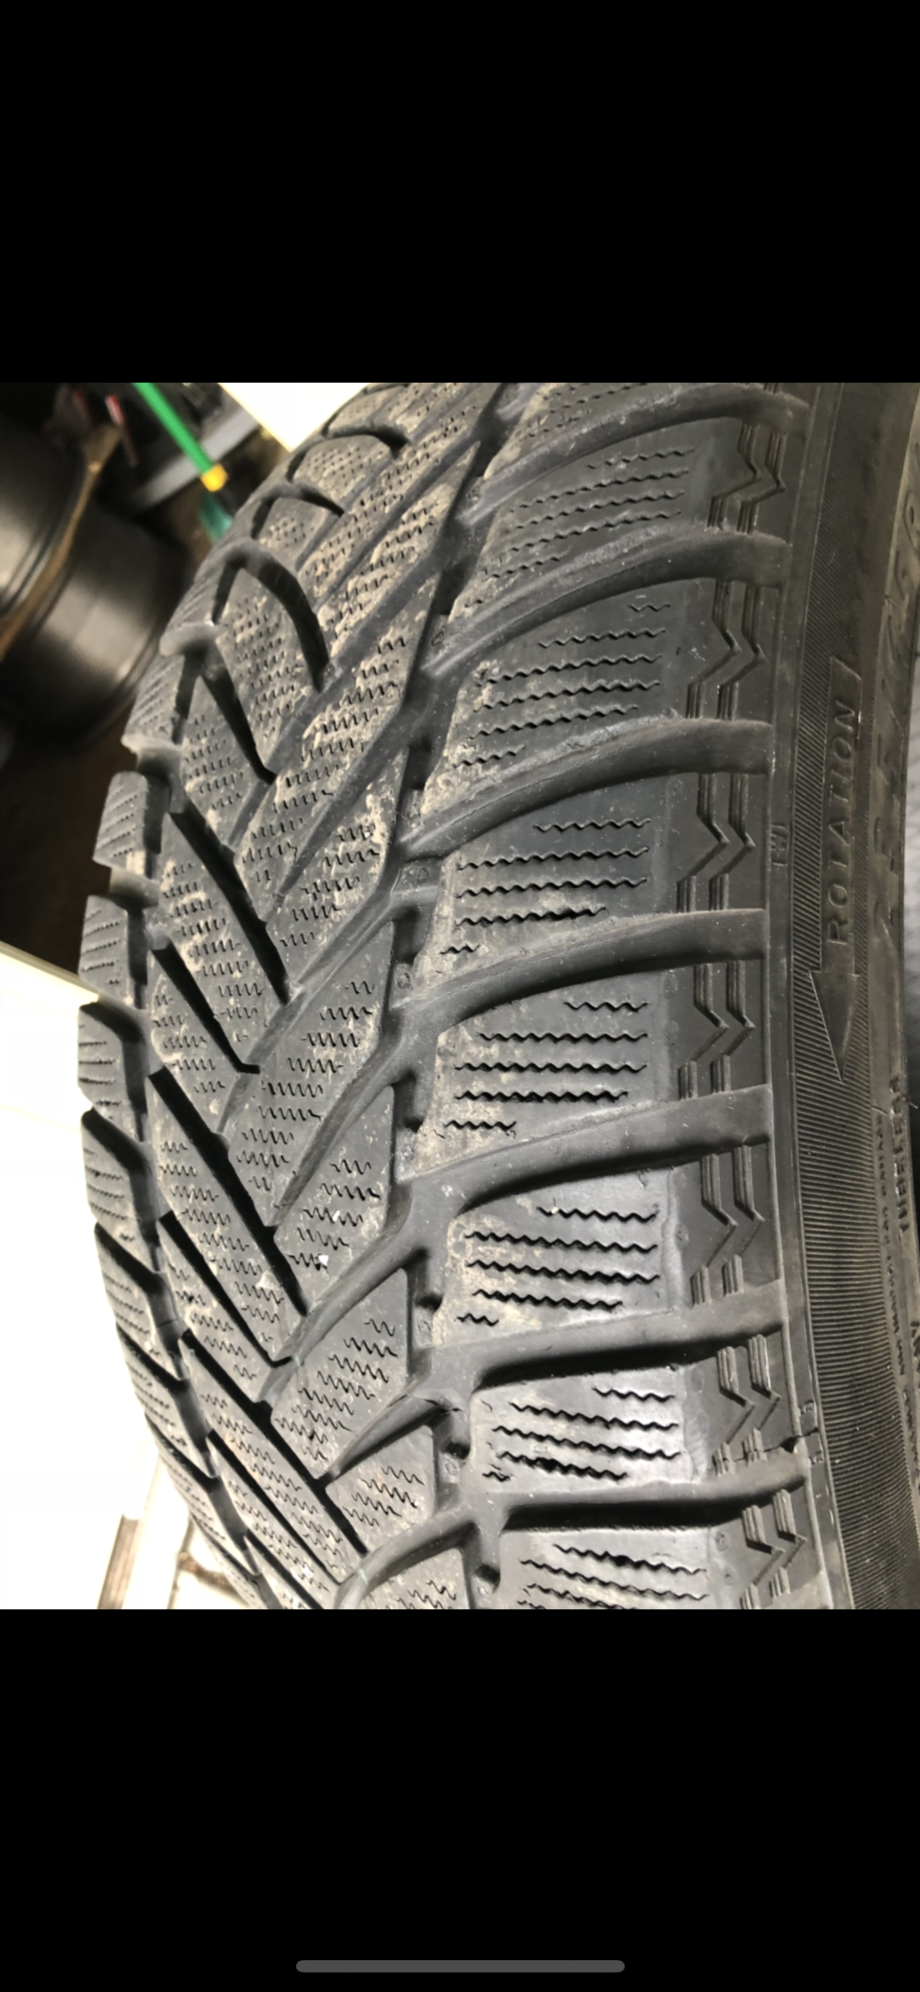 Wheels and Tires/Axles - Dunlop Snow Tires - Used - All Years Any Make All Models - Middle Village, NY 11379, United States